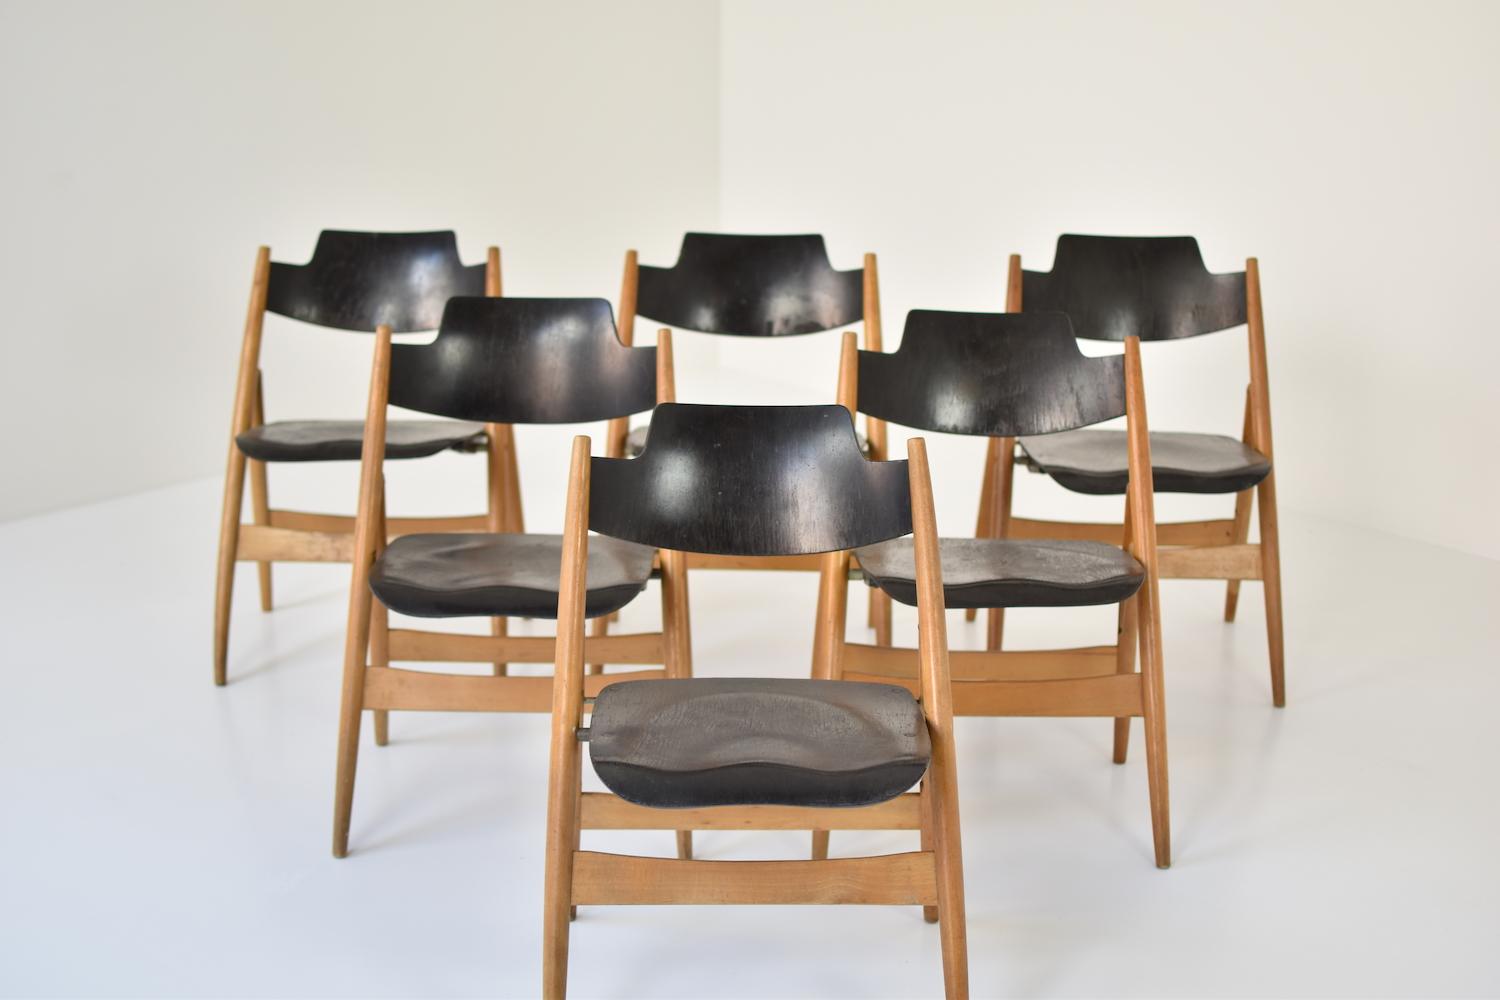 Stunning set SE18 dining chairs by Egon Eiermann for Wilde & Spieth, Germany 1952. This set is crafted from solid natural beechwood, seating and backrest of dark stained beechwood veneer and multi-layered beech veneer. Visible signs of age and wear,